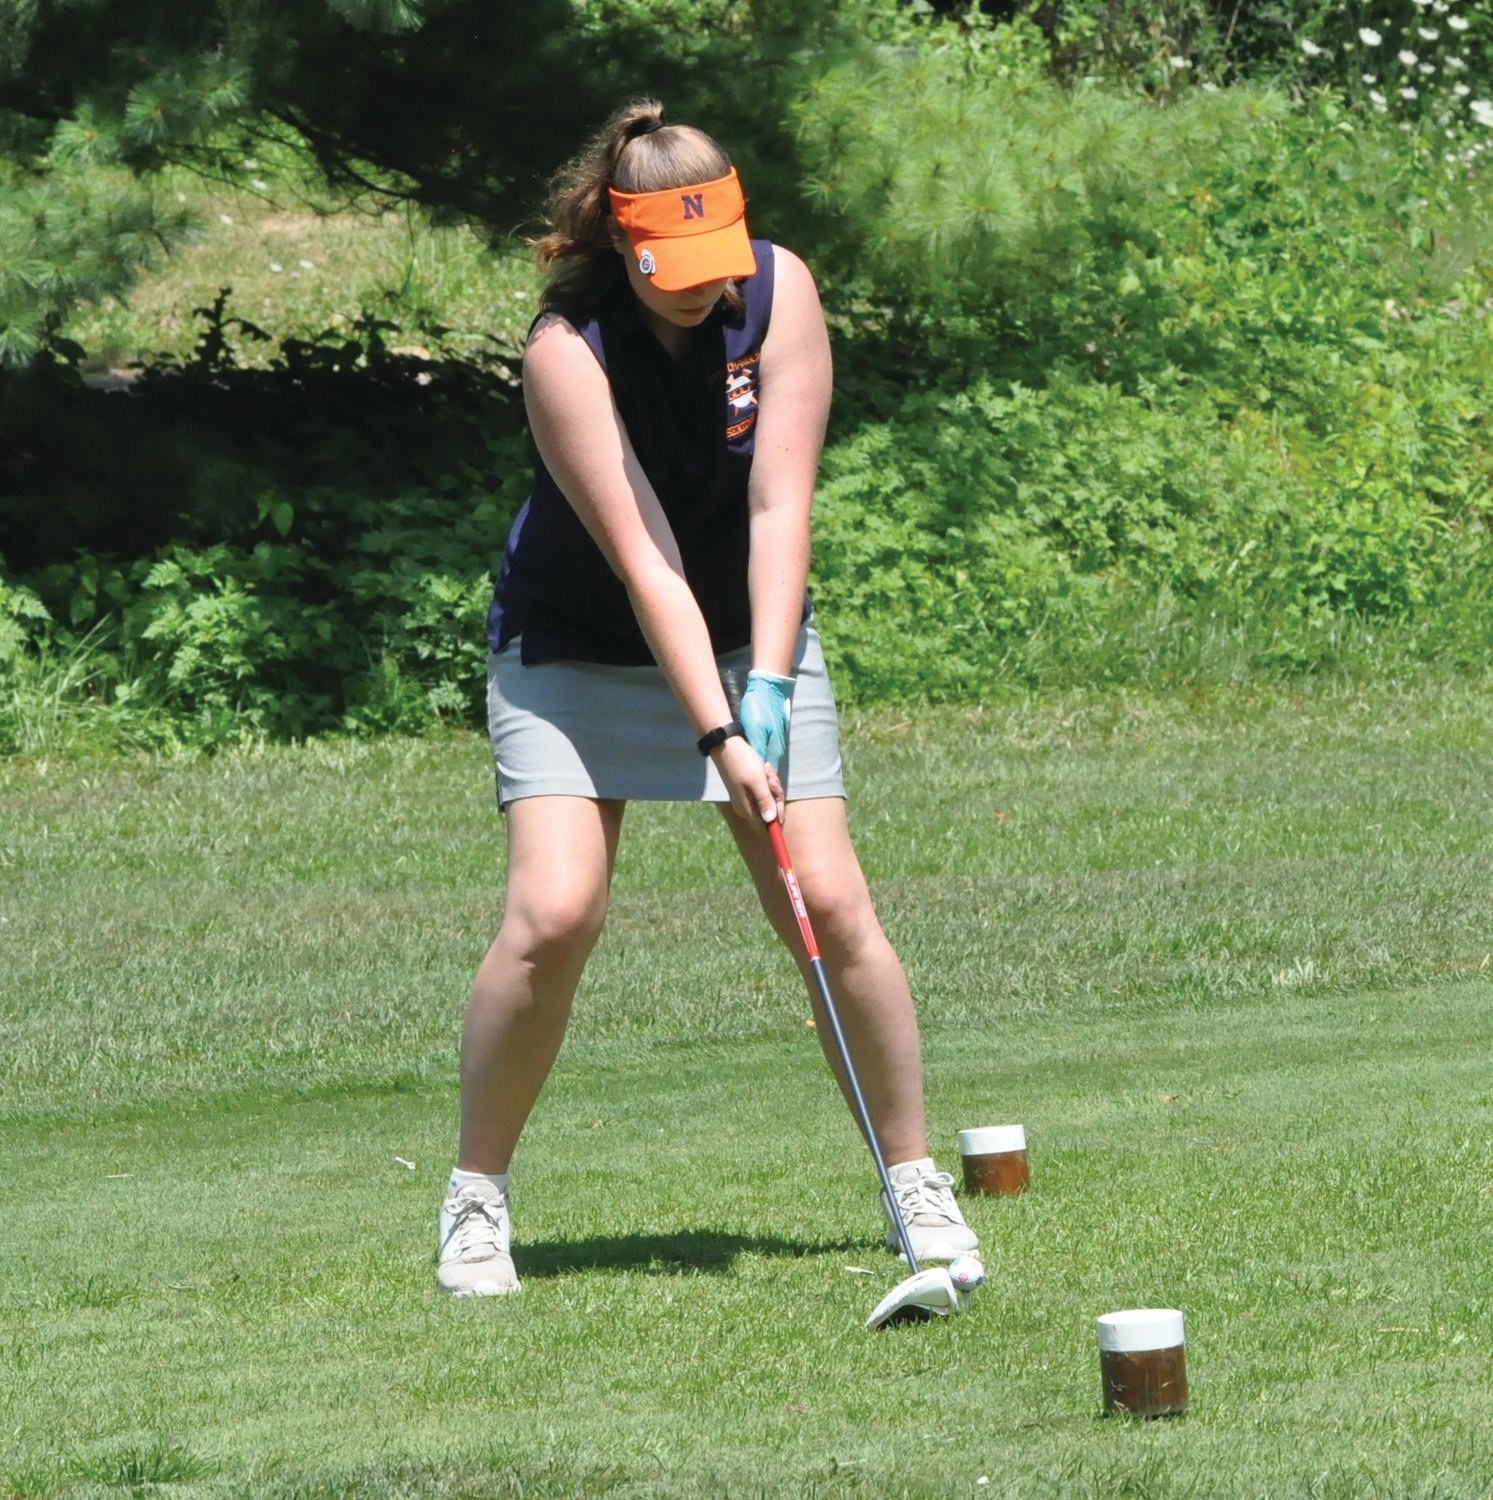 North Montgomery's Morgan Swick prepares to tee off on No. 1 at Harrison Hills on Monday.